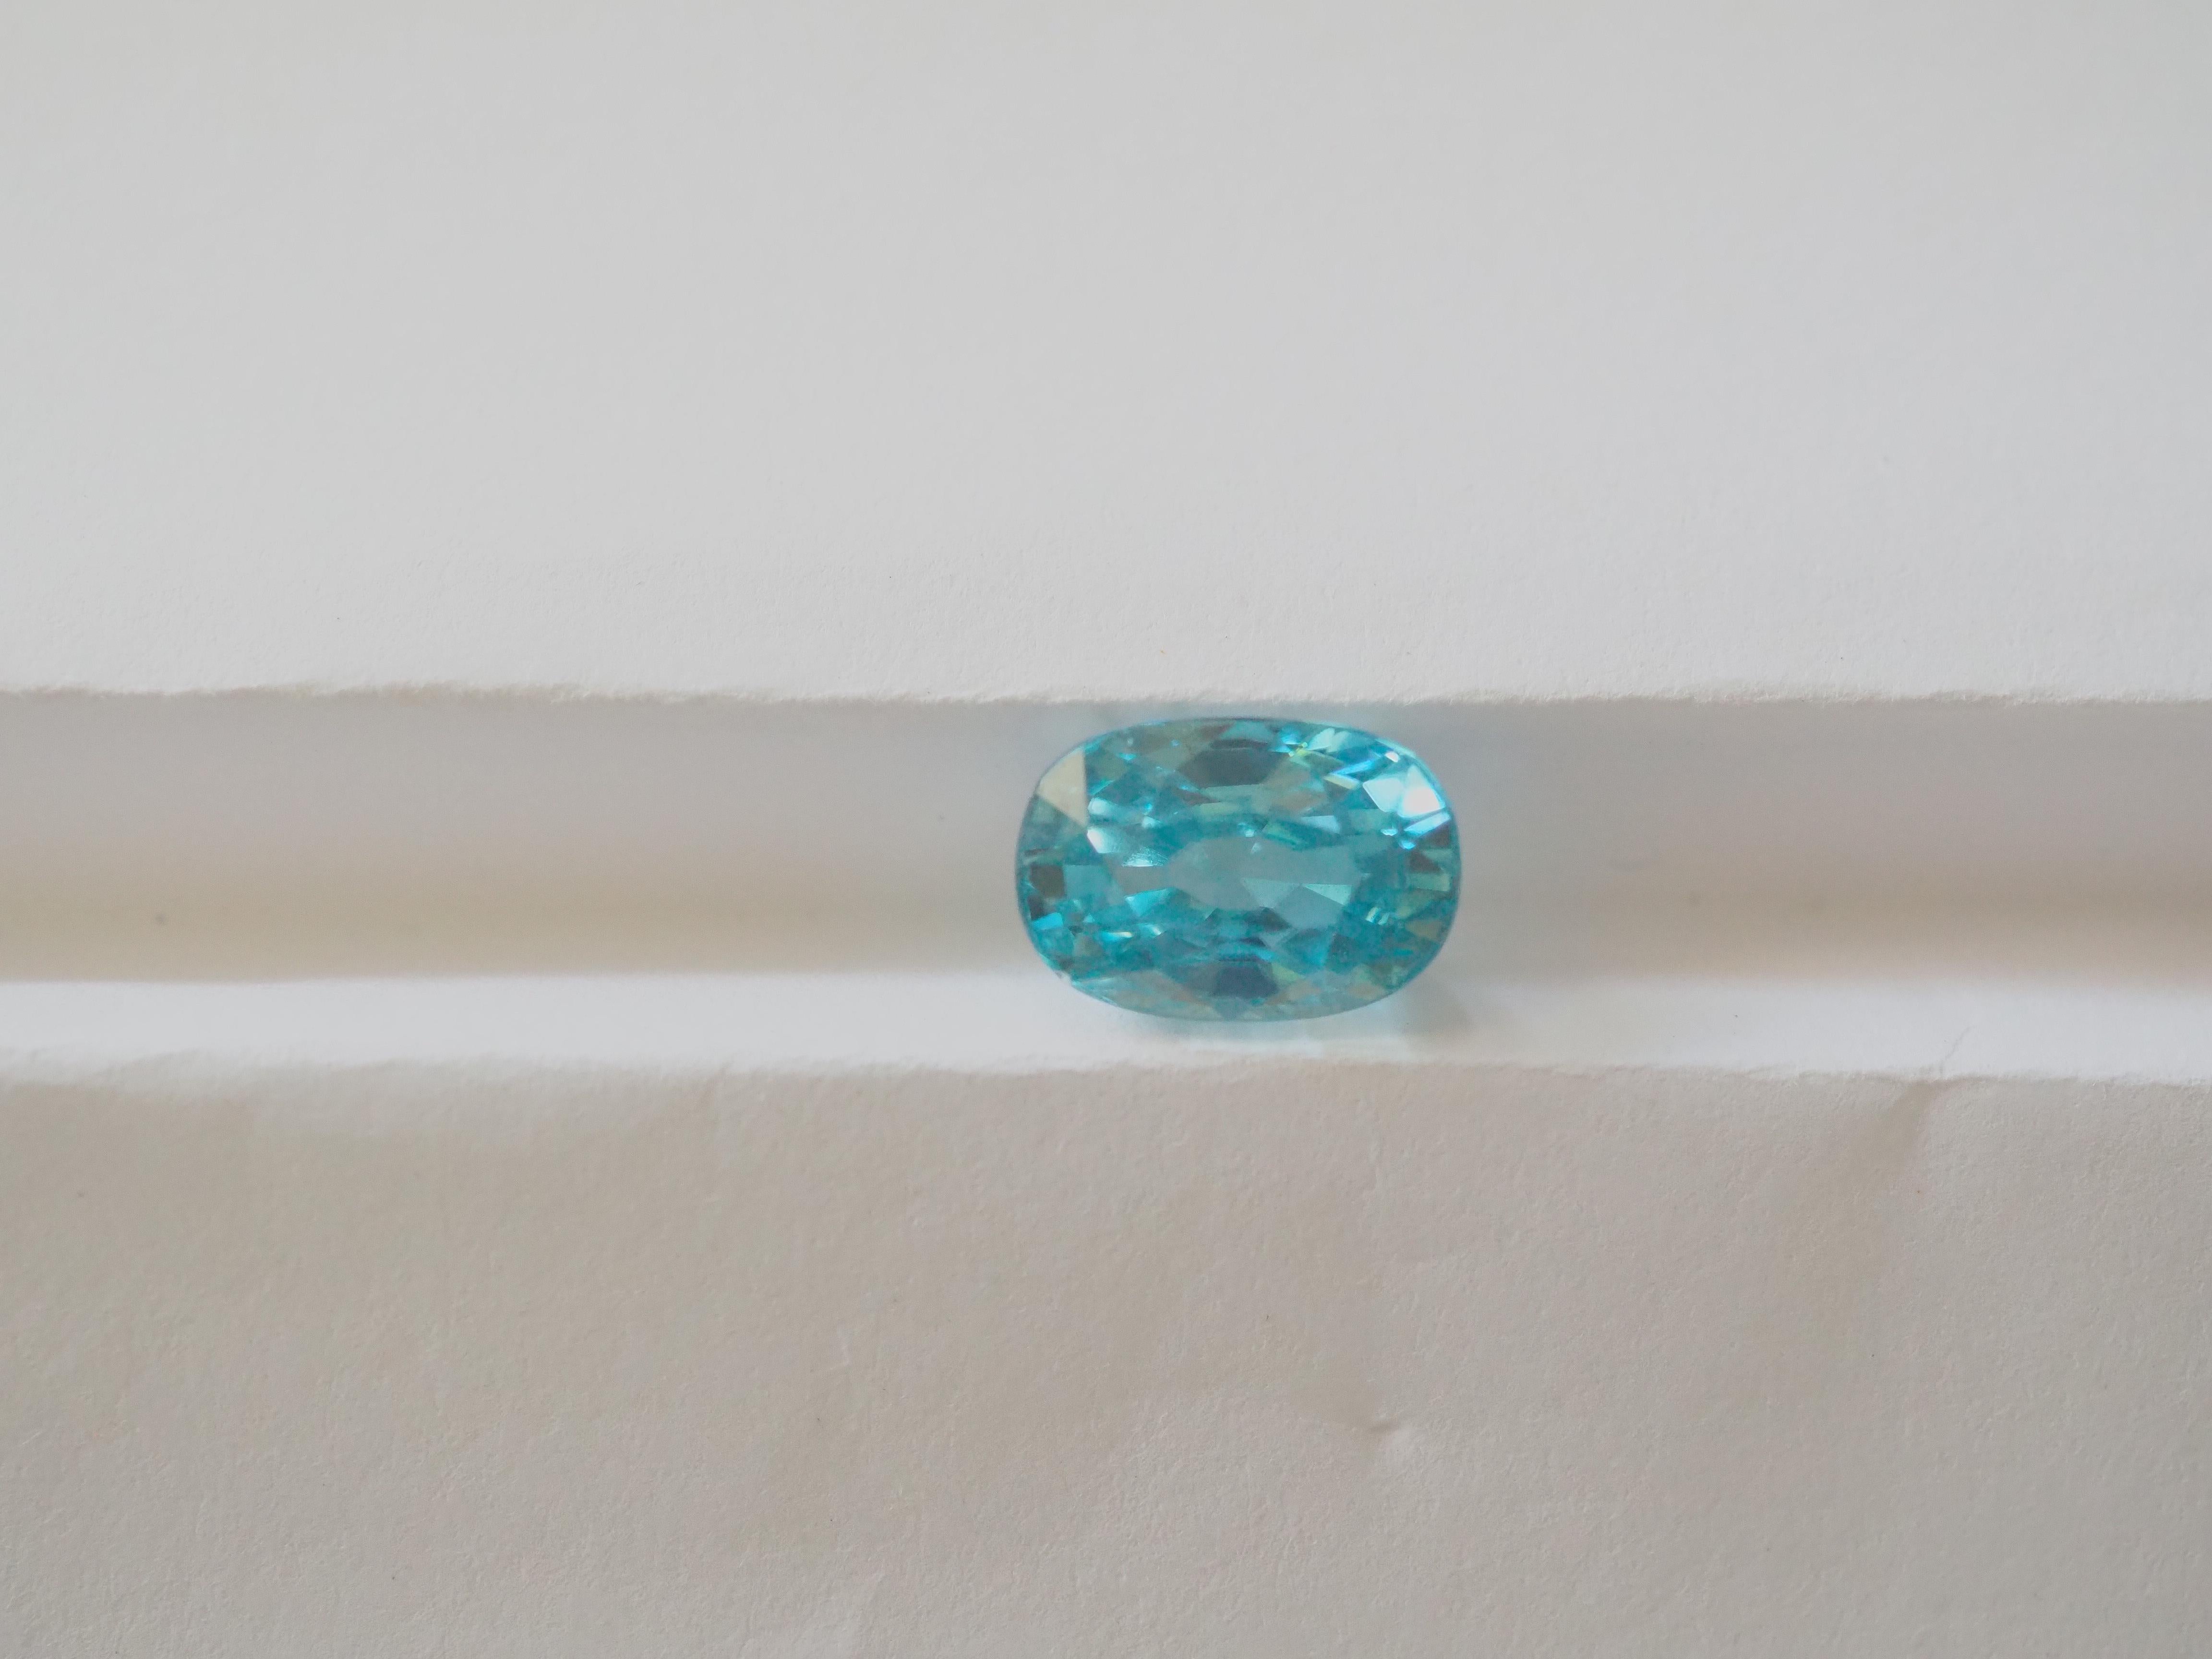 AIGS Certified 4.80ct Oval Blue Zircon, 10.27x7.09x5.89 mm For Sale 3